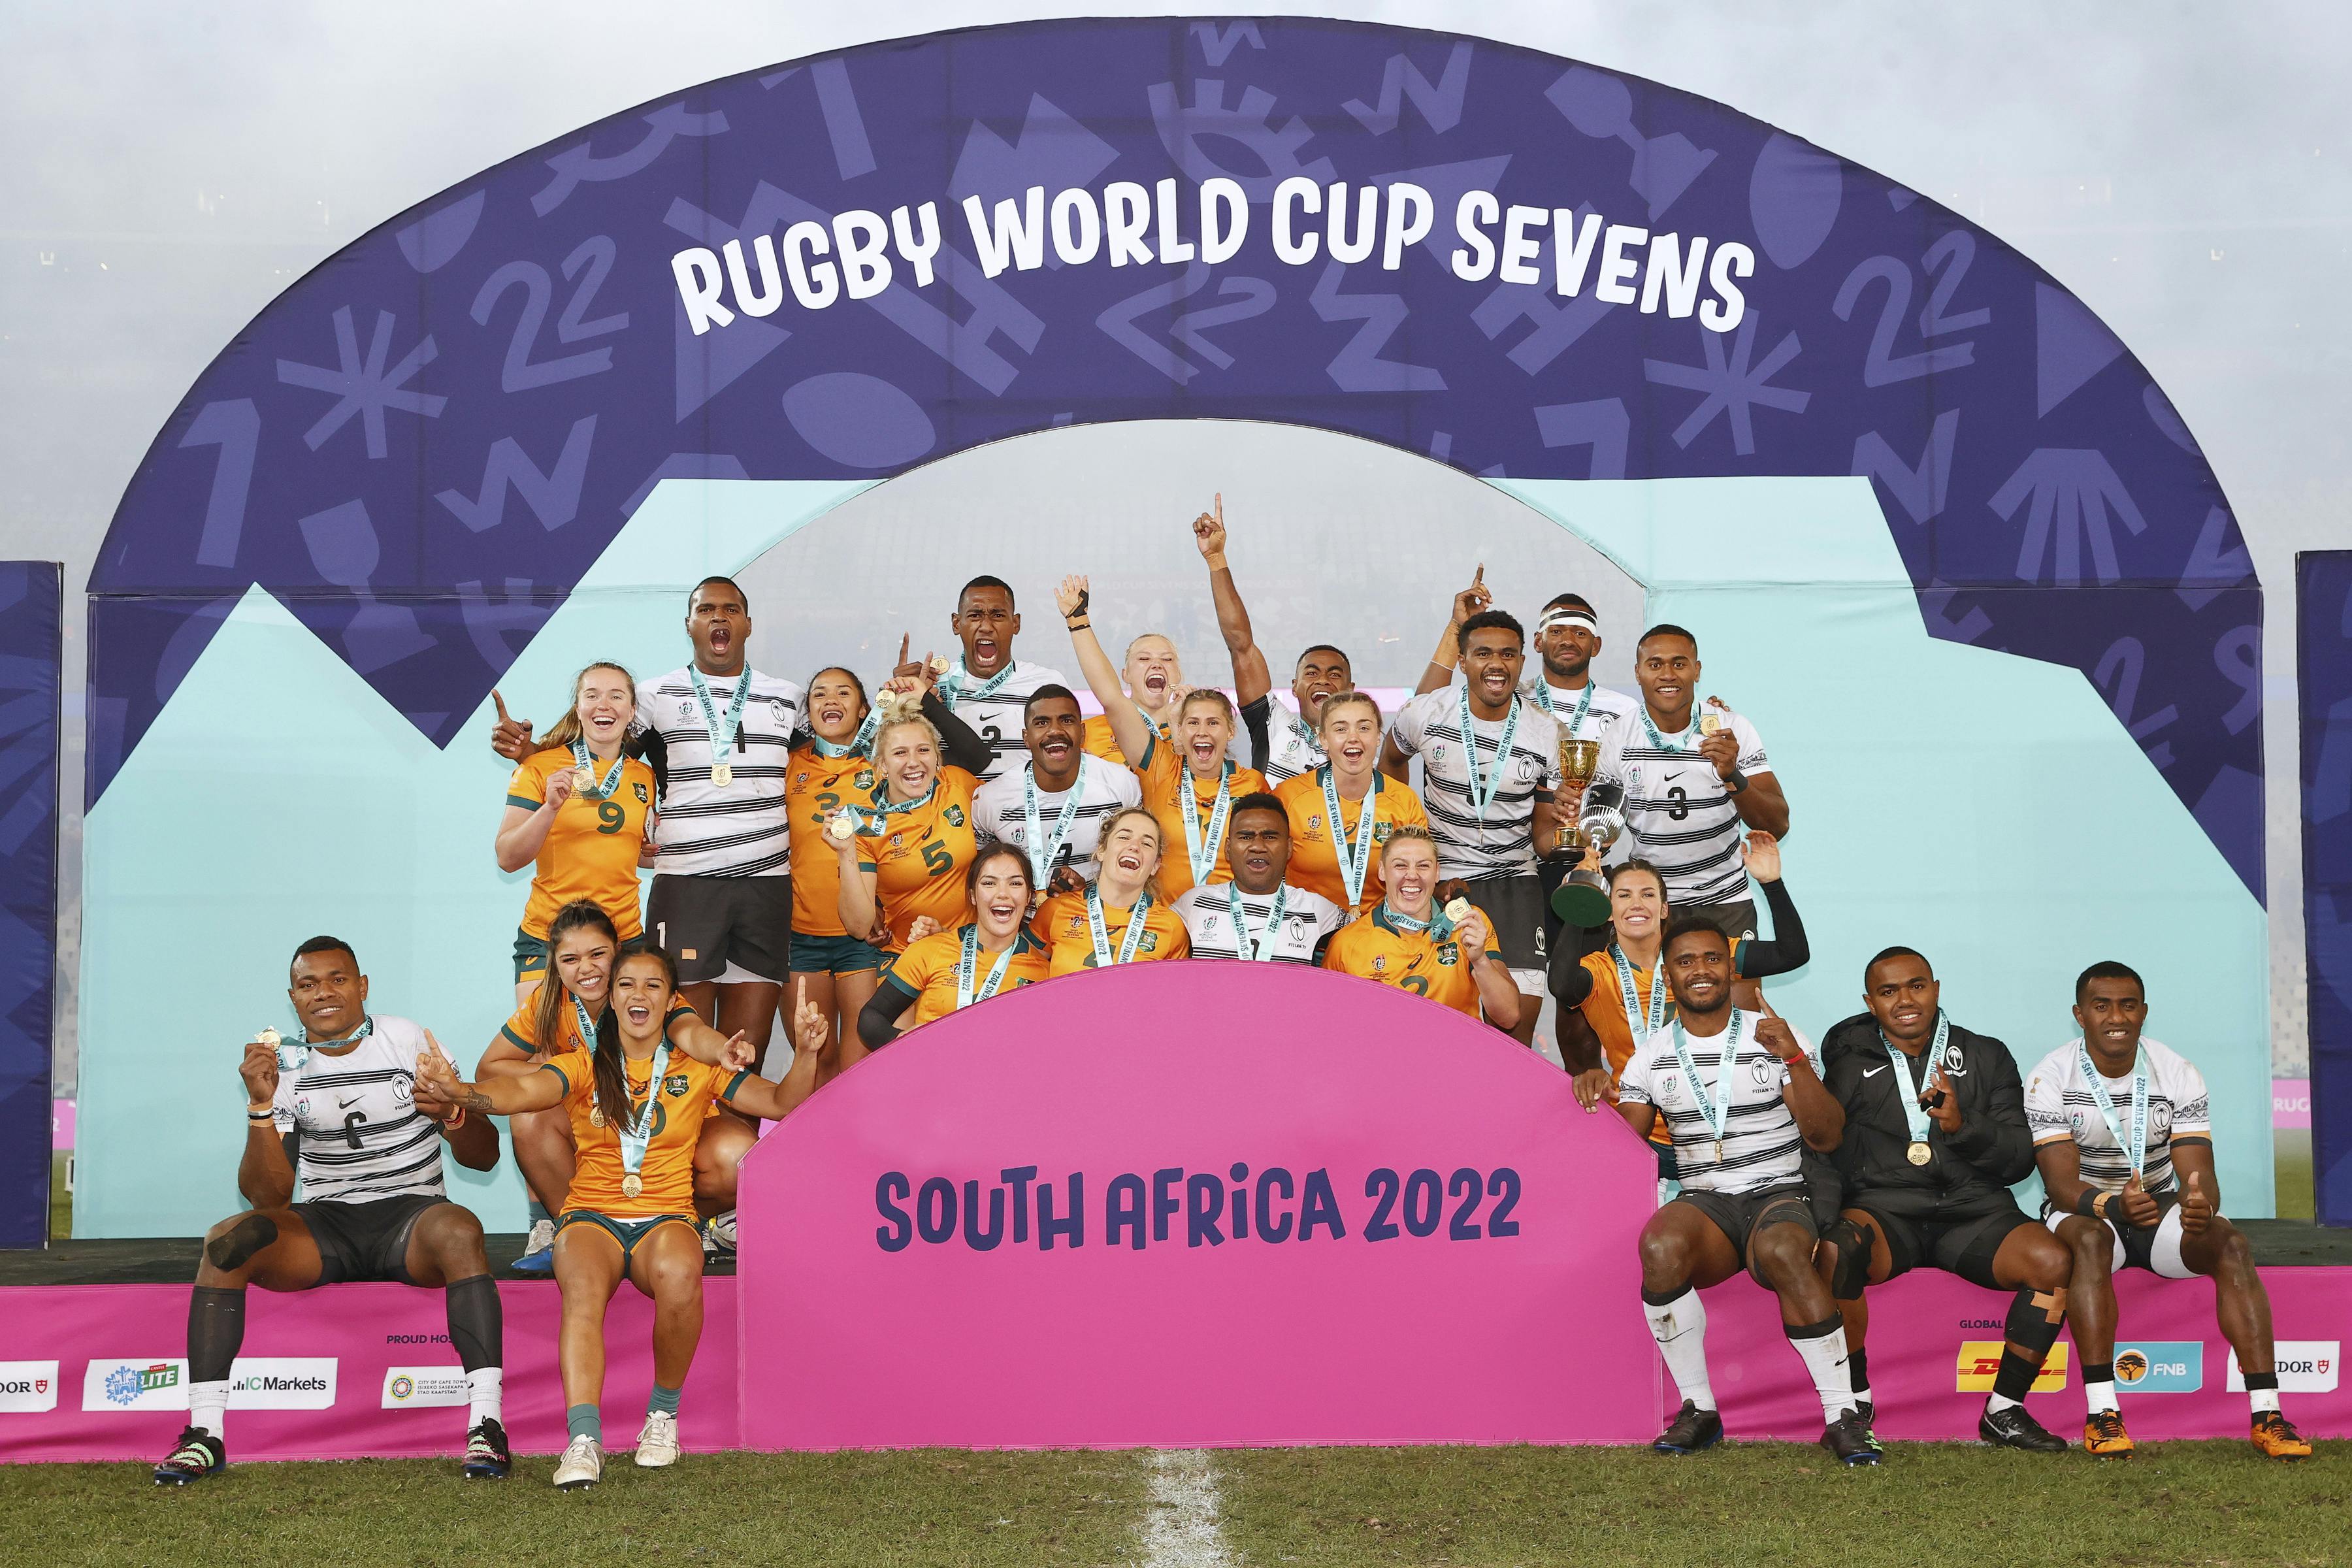 Australia and Fiji Celebrate Rugby World Cup Sevens Title Wins (Photo: Mike Lee for World Rugby)